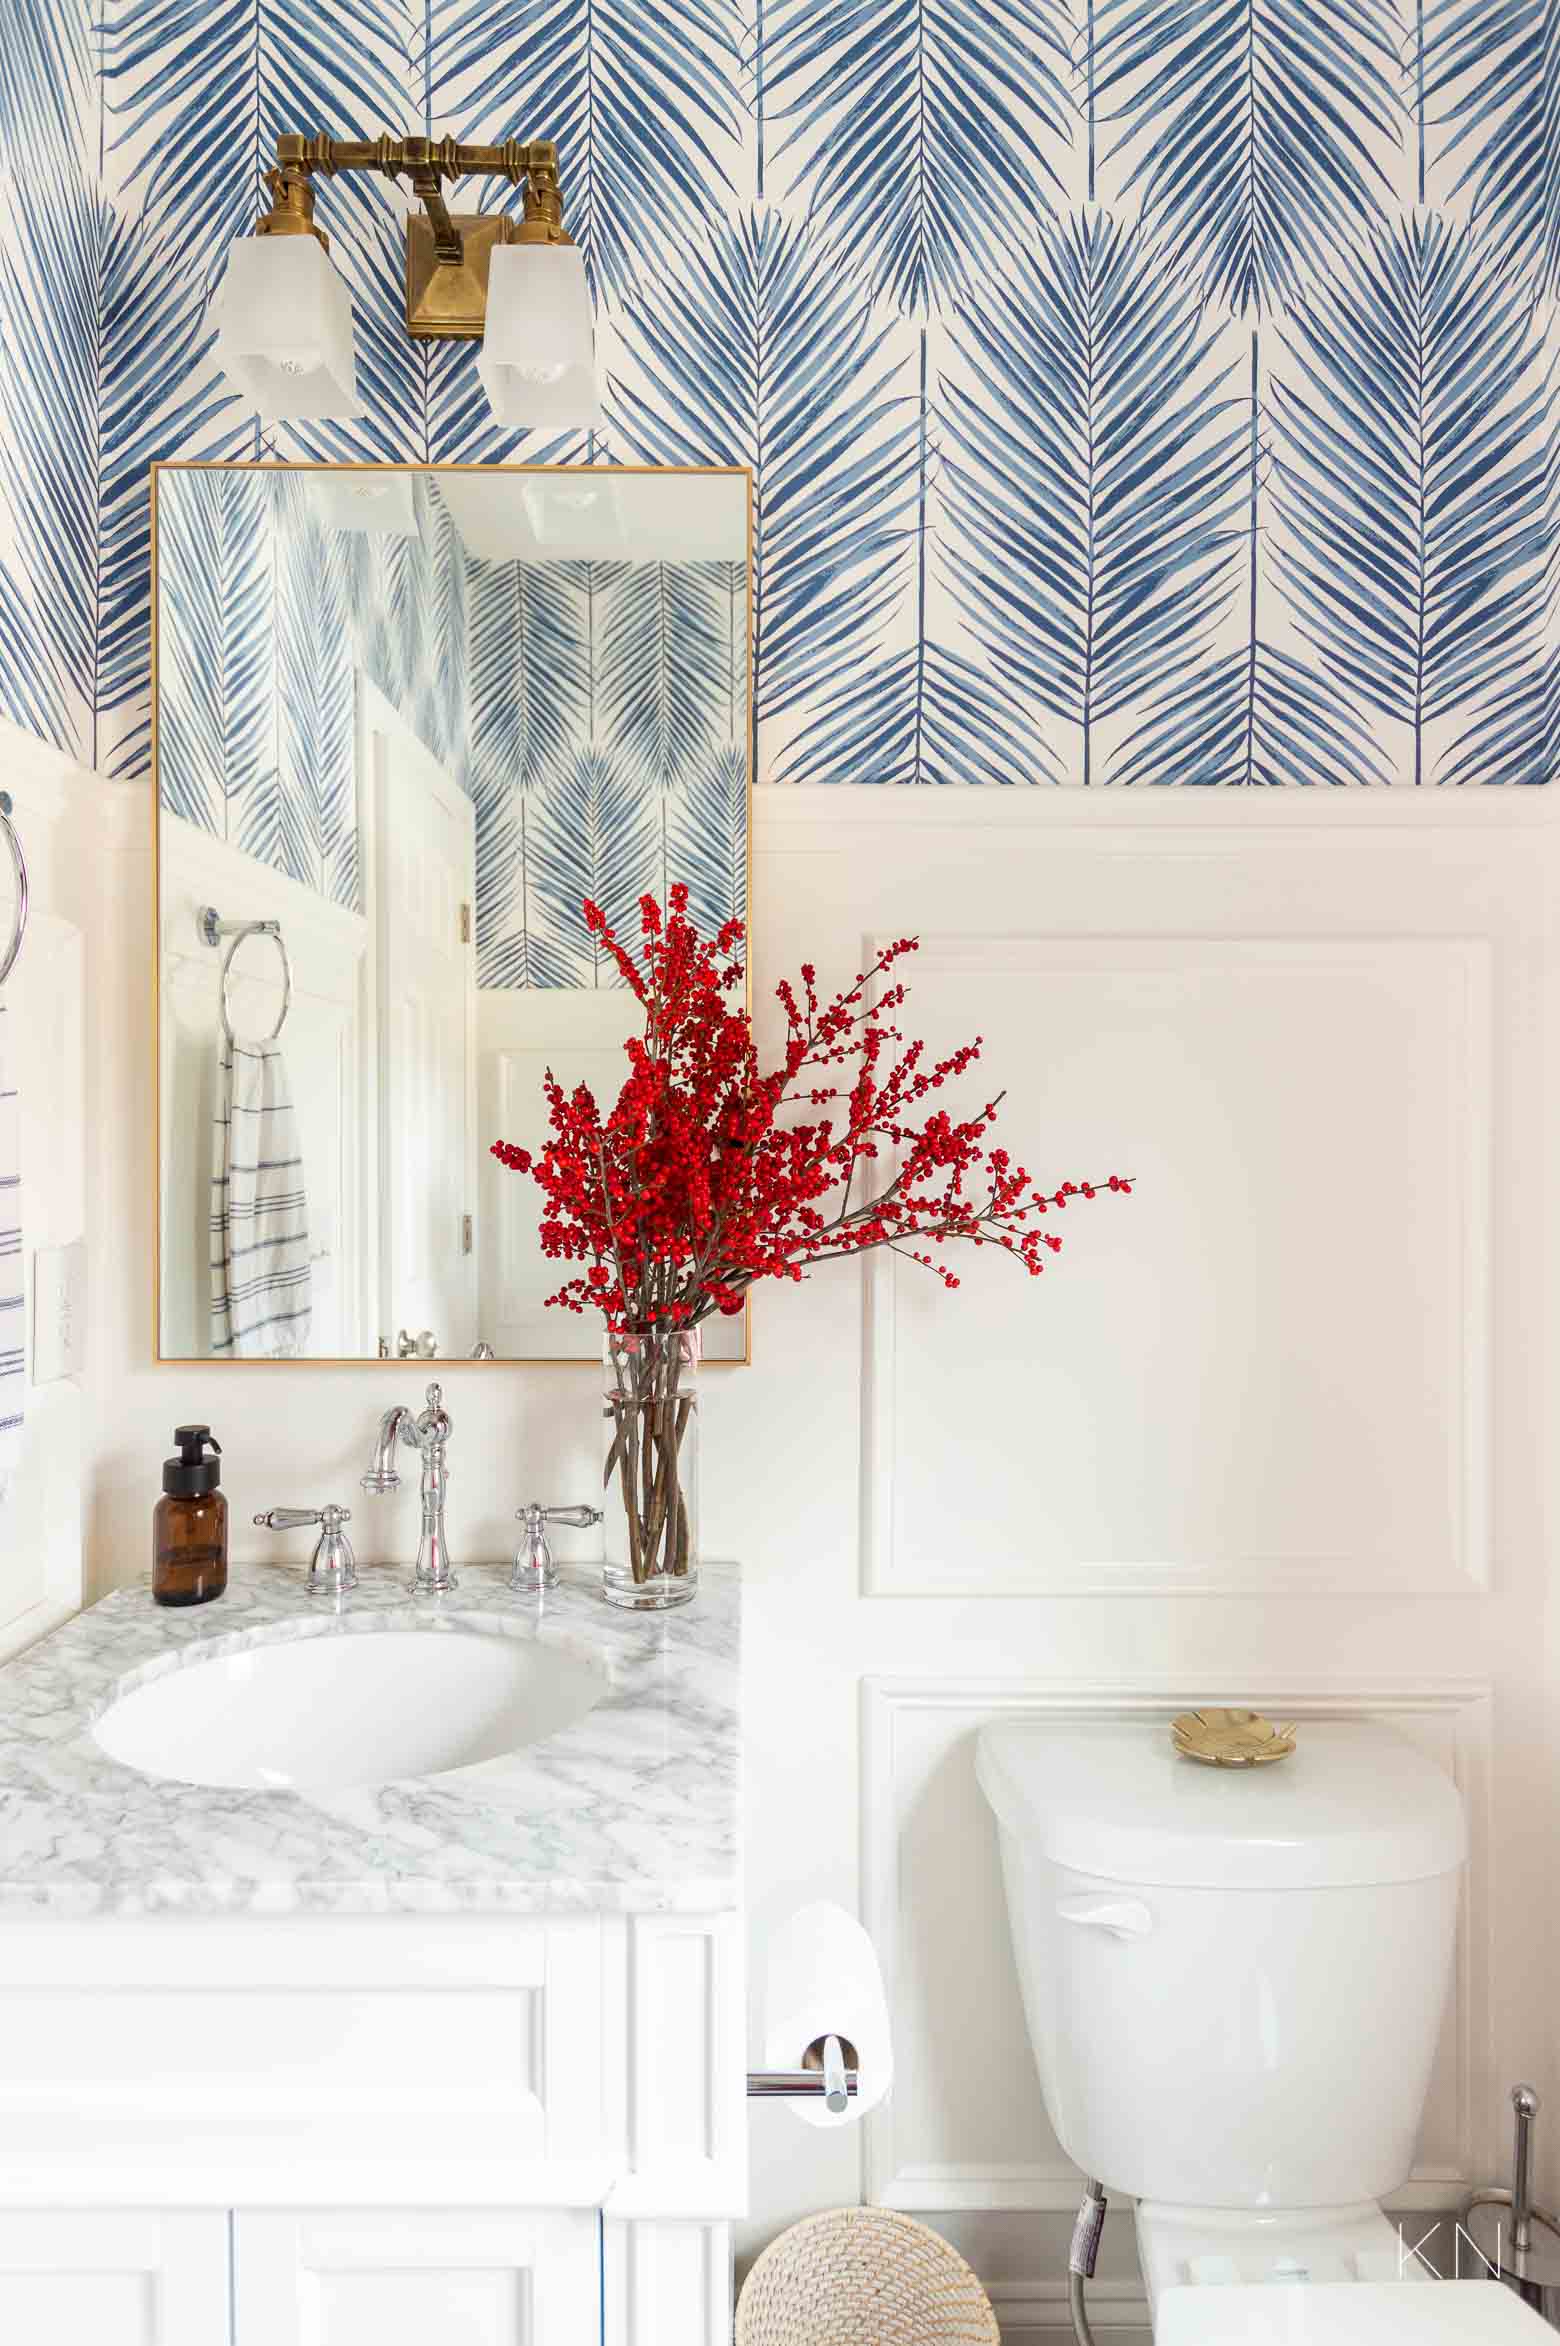 Simple Christmas Bathroom Decor -- Red Berries and Blue and White Wallpaper